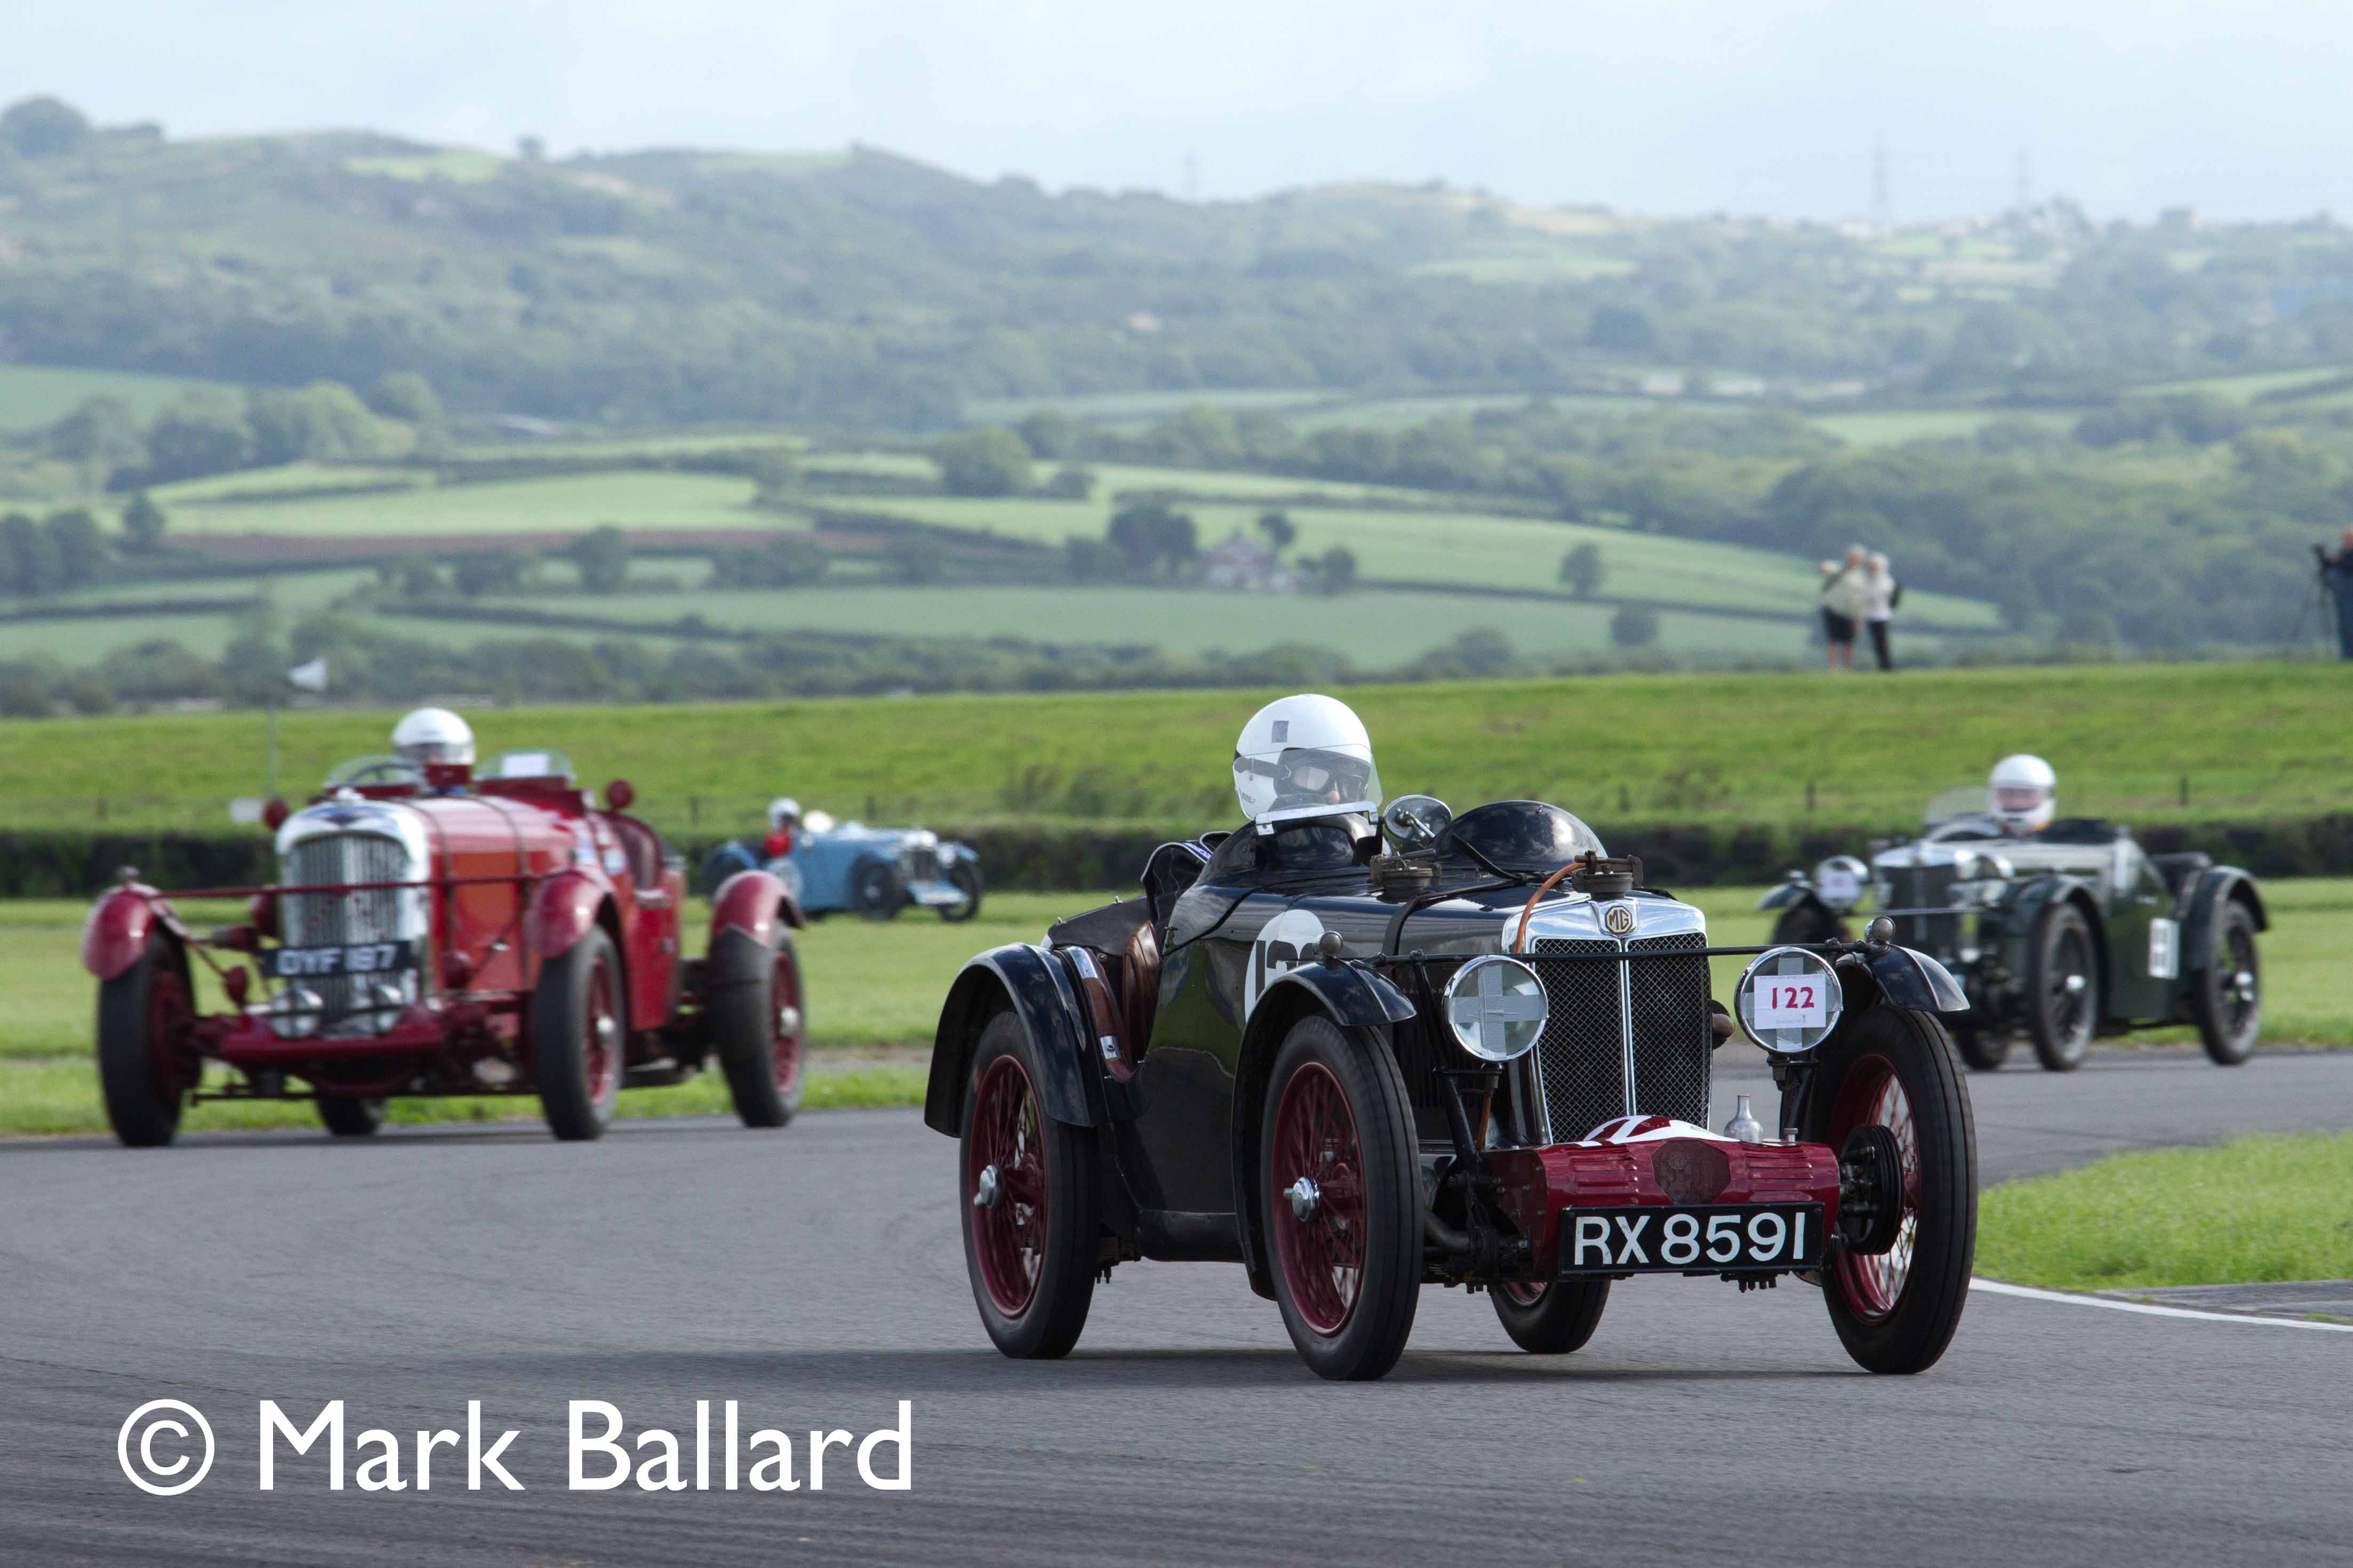 The VSCC Welsh Speed Weekend is coming to Pembrey cover